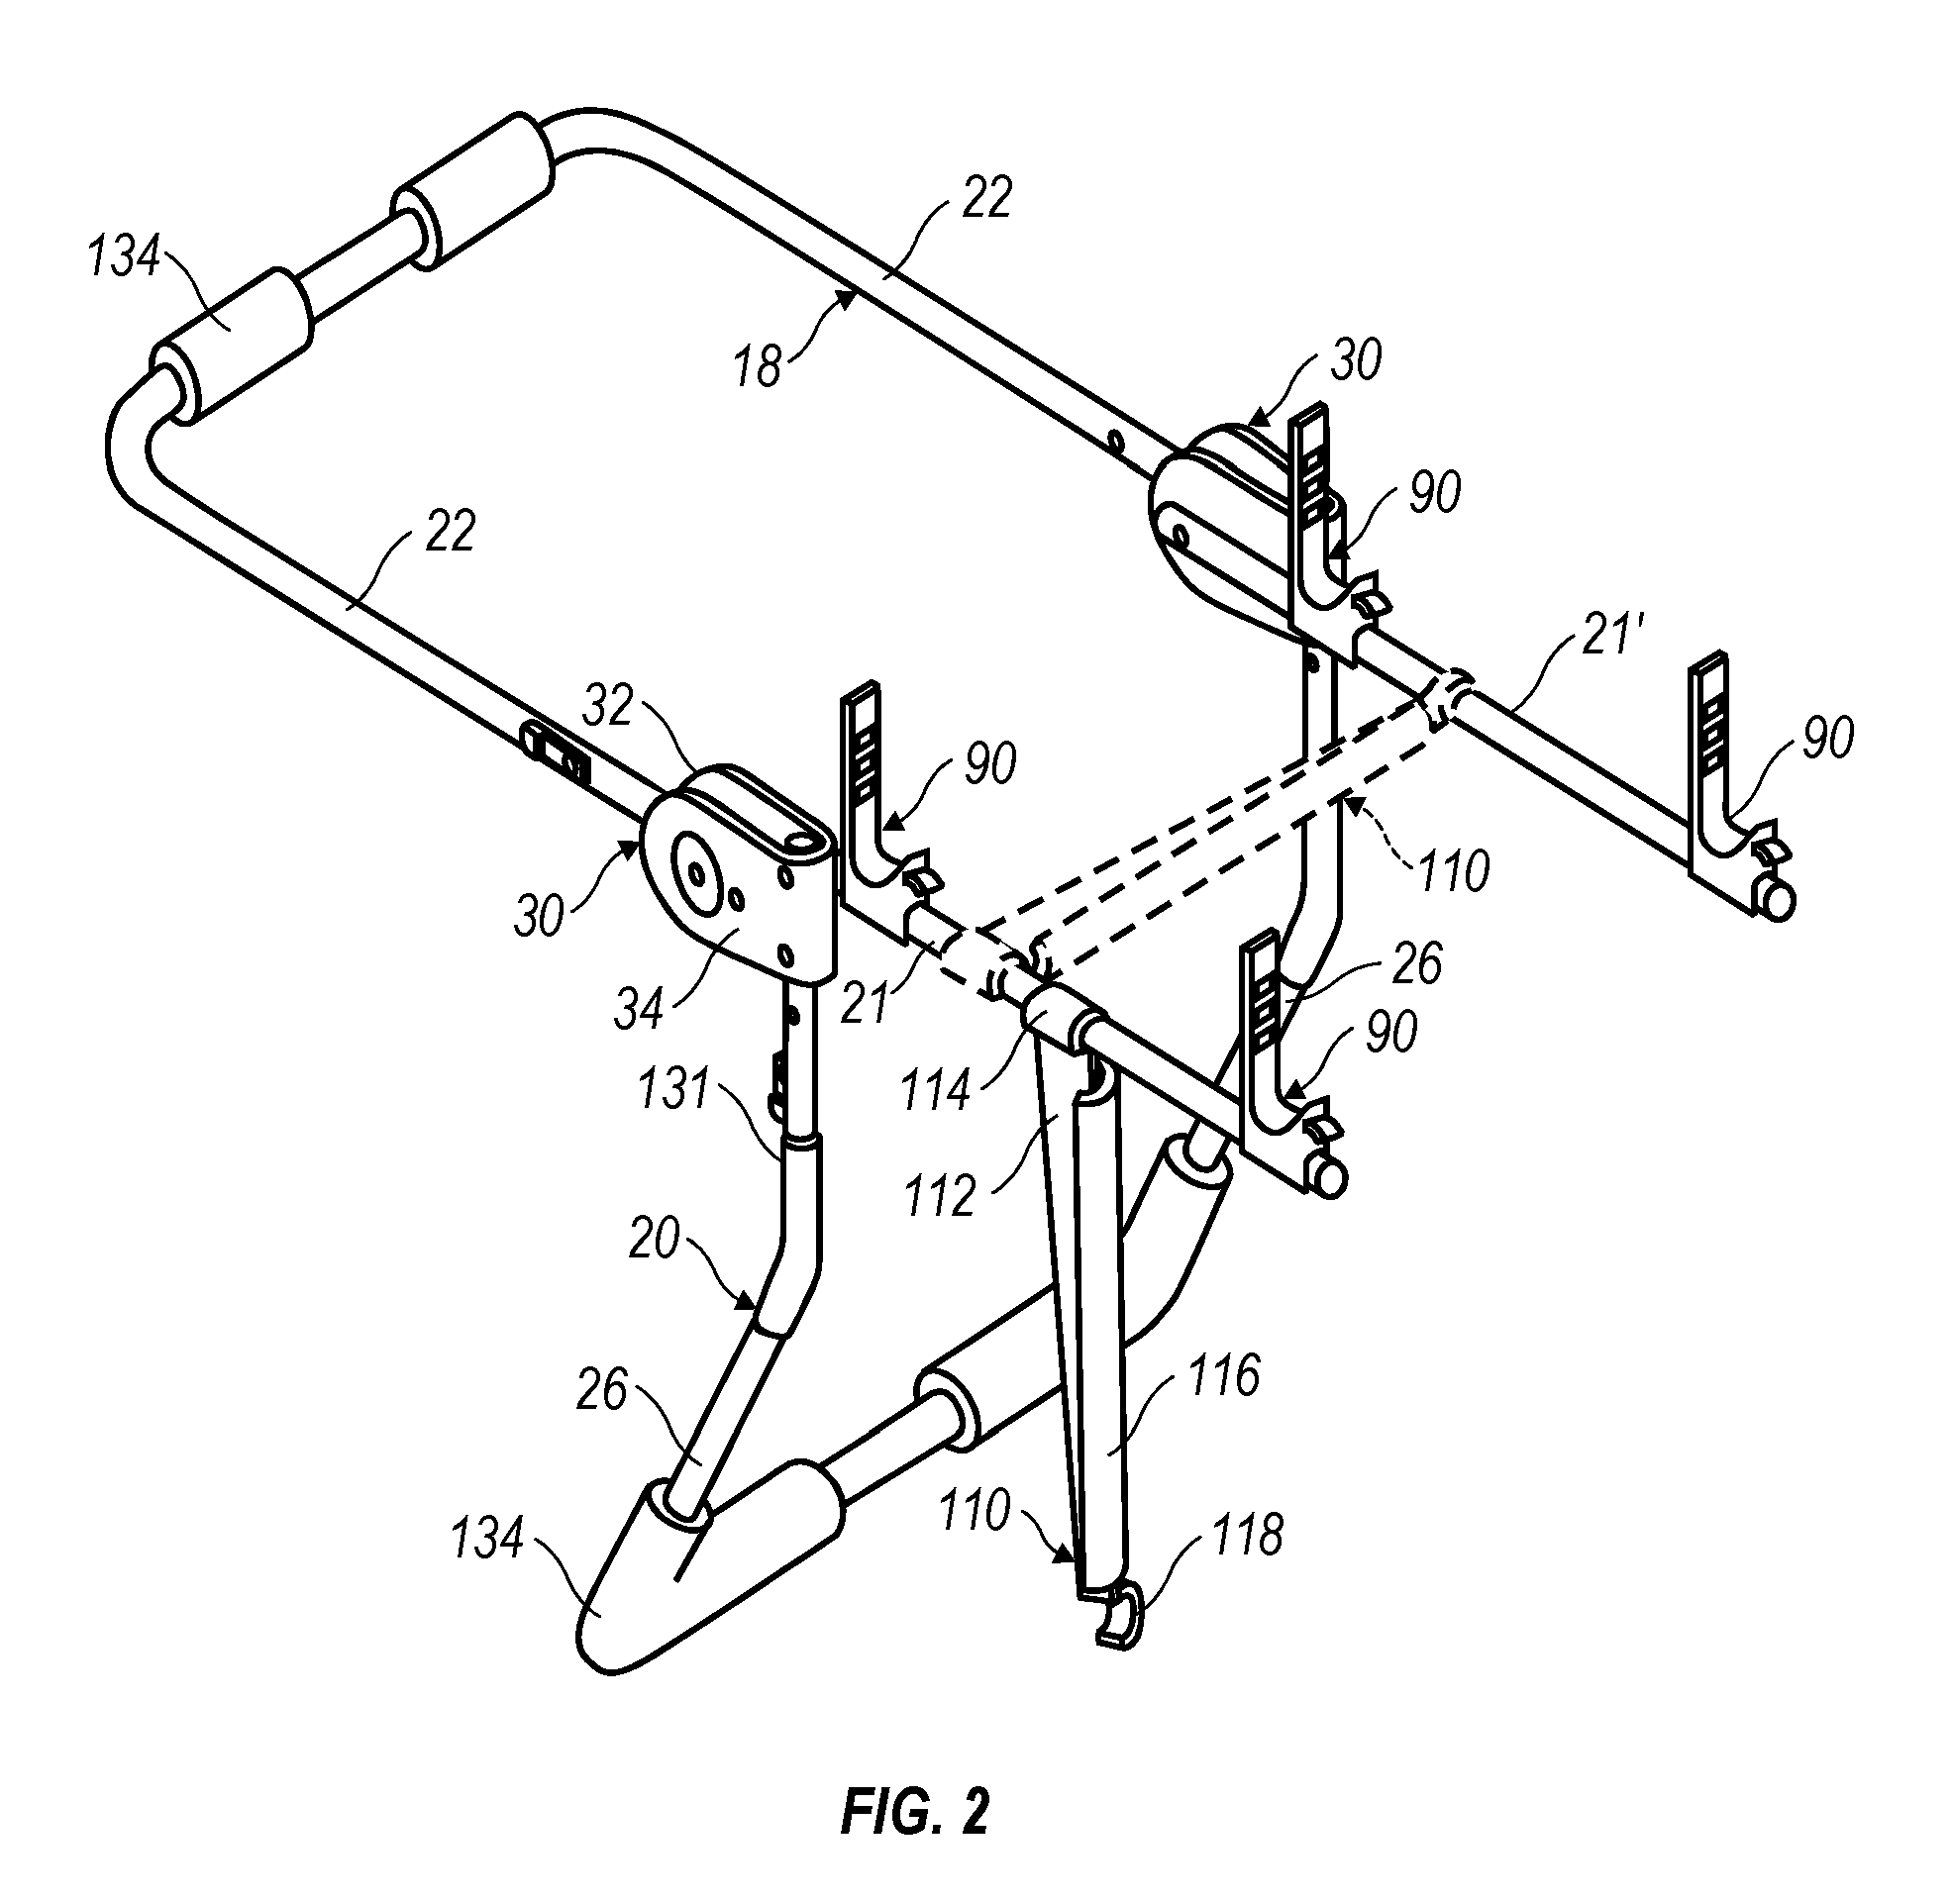 Anti-sway arrangement for cargo on a load carrier